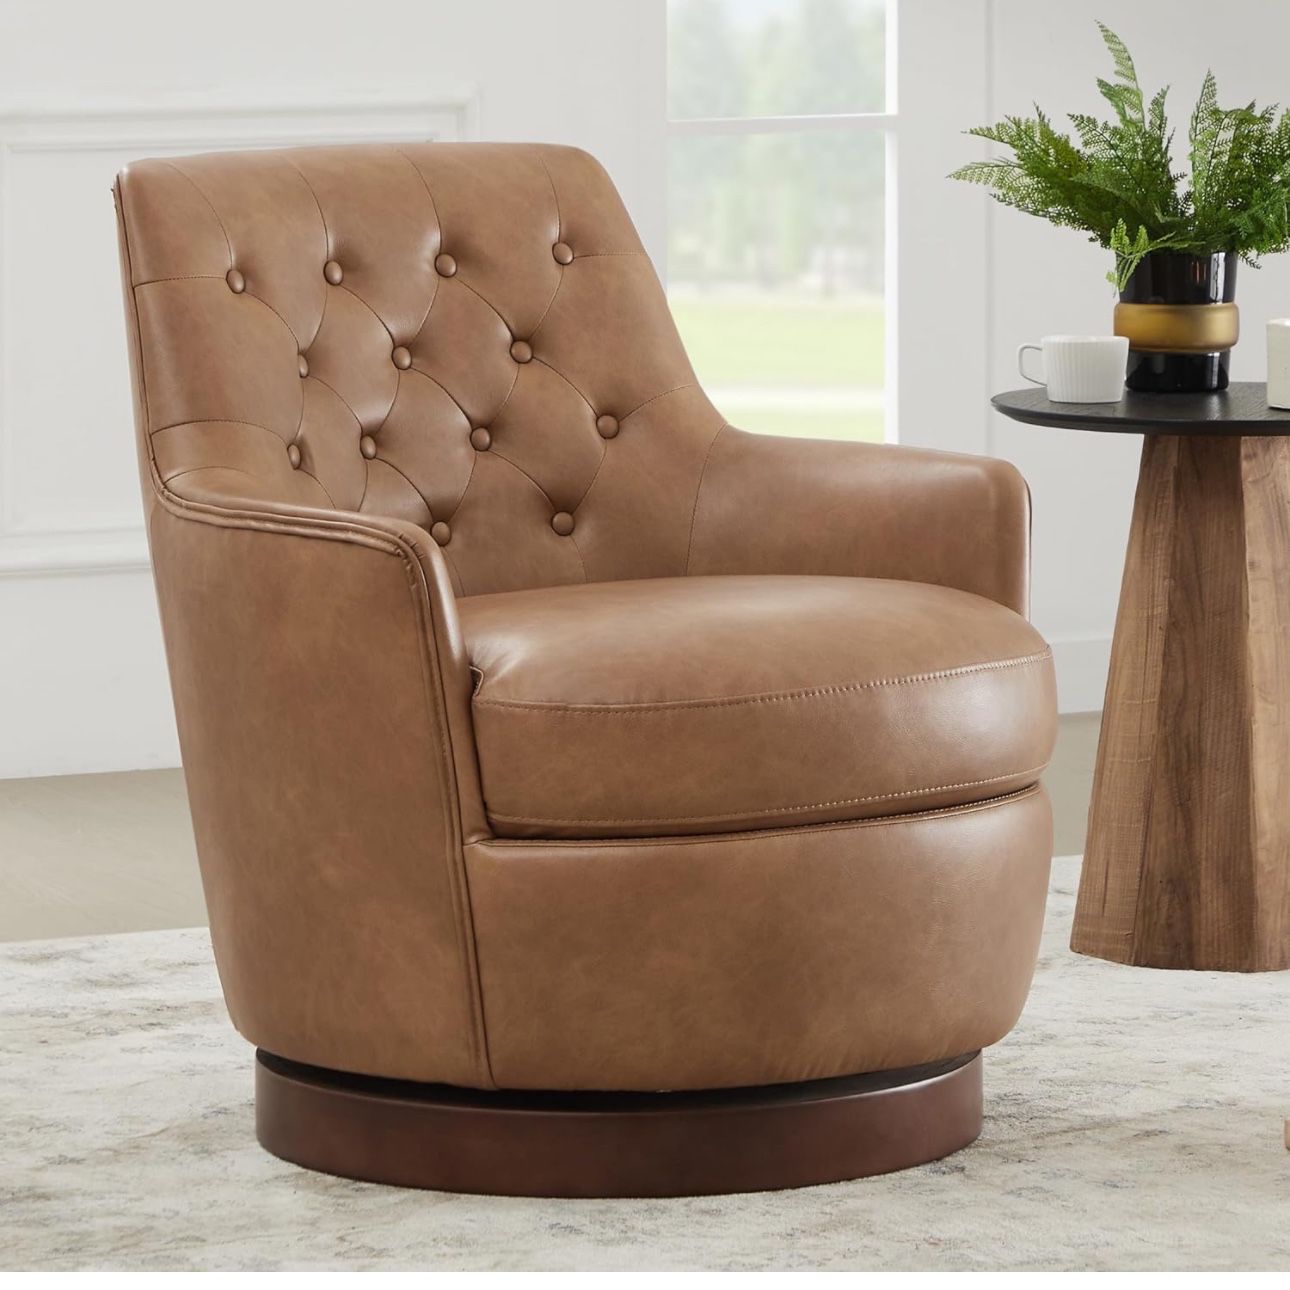 Brand New S wivel Barrel Accent Chair Tufted Upholstered Armchair for Living Room and Bedroom, Brown